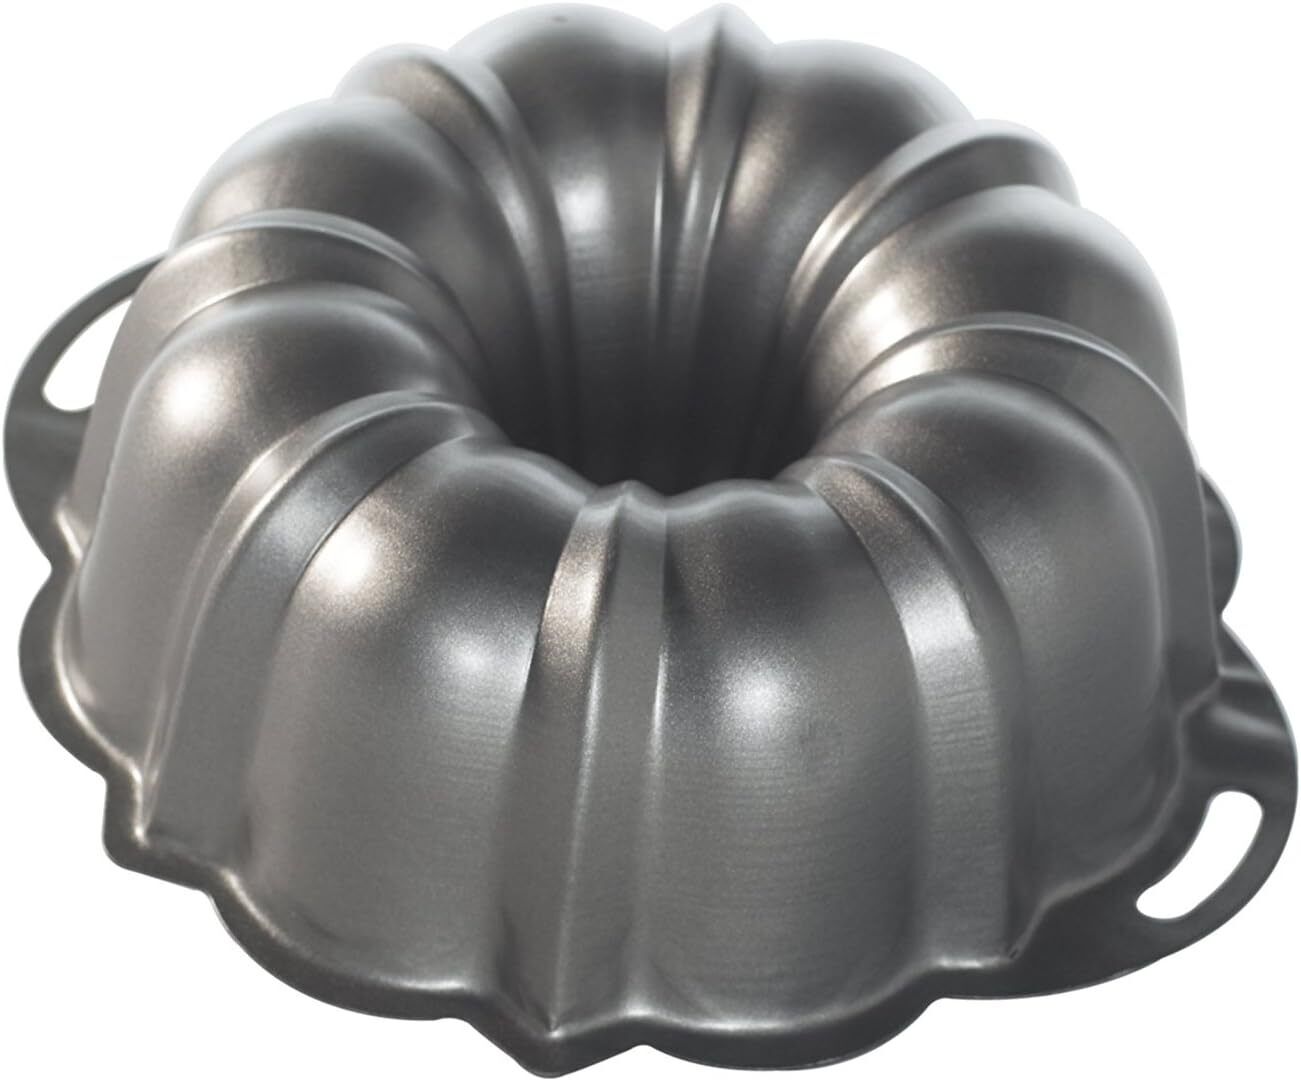 Nordic Ware Aluminum Bundt Cake Pan with Handles, 12 Cup, Non-stick Surface